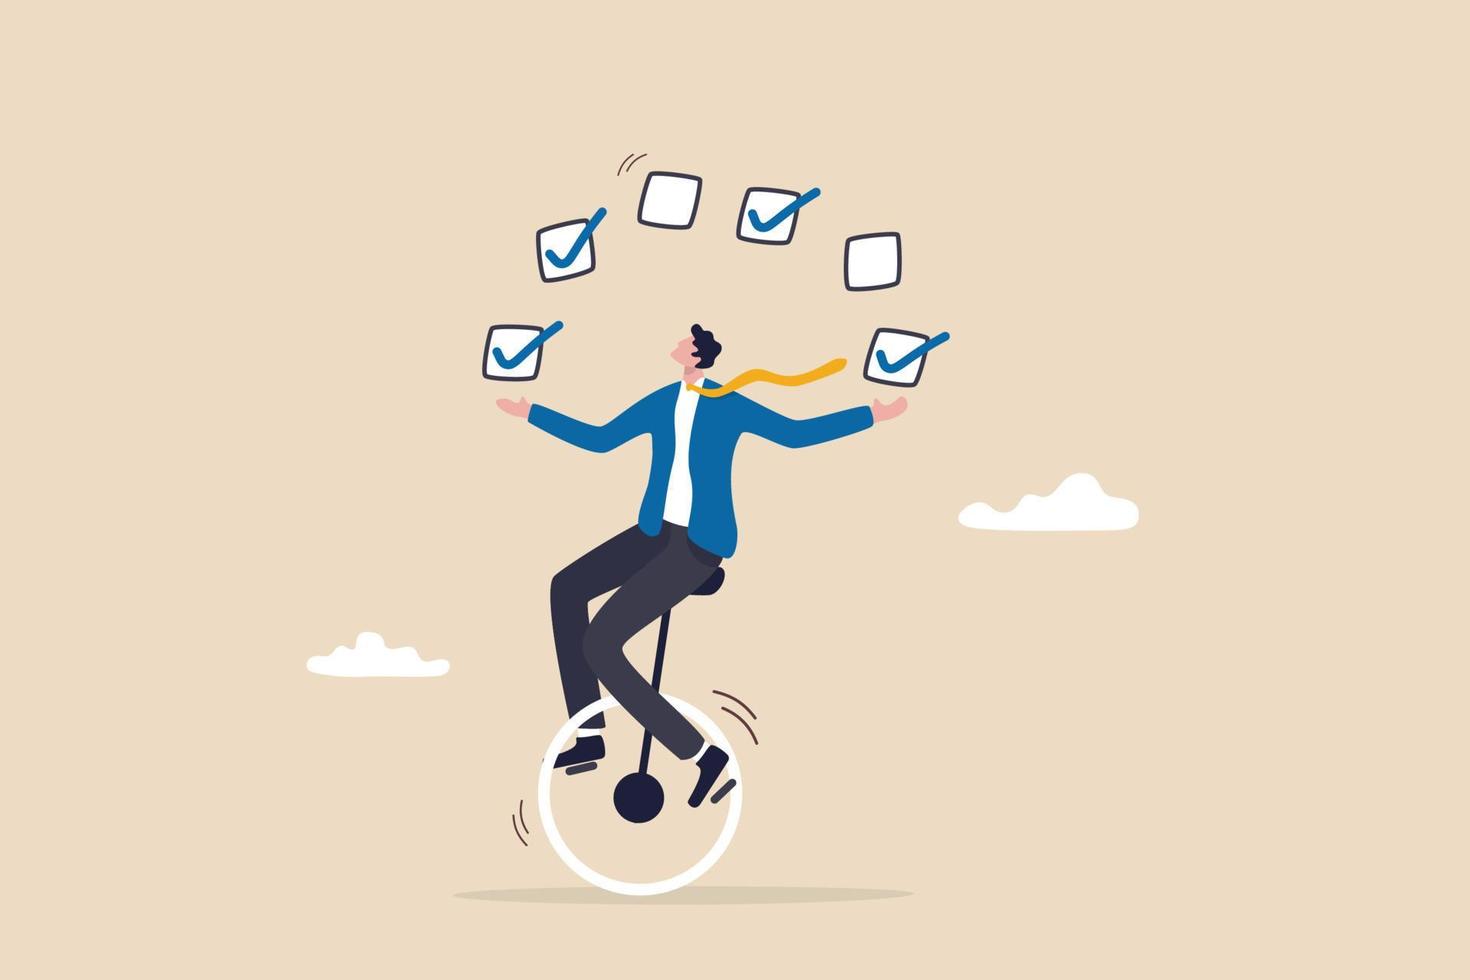 Todo list professional, business or work accomplishment, project management to track completed tasks or checklist to check for completion concept, businessman juggling checkbox on unicycle. vector